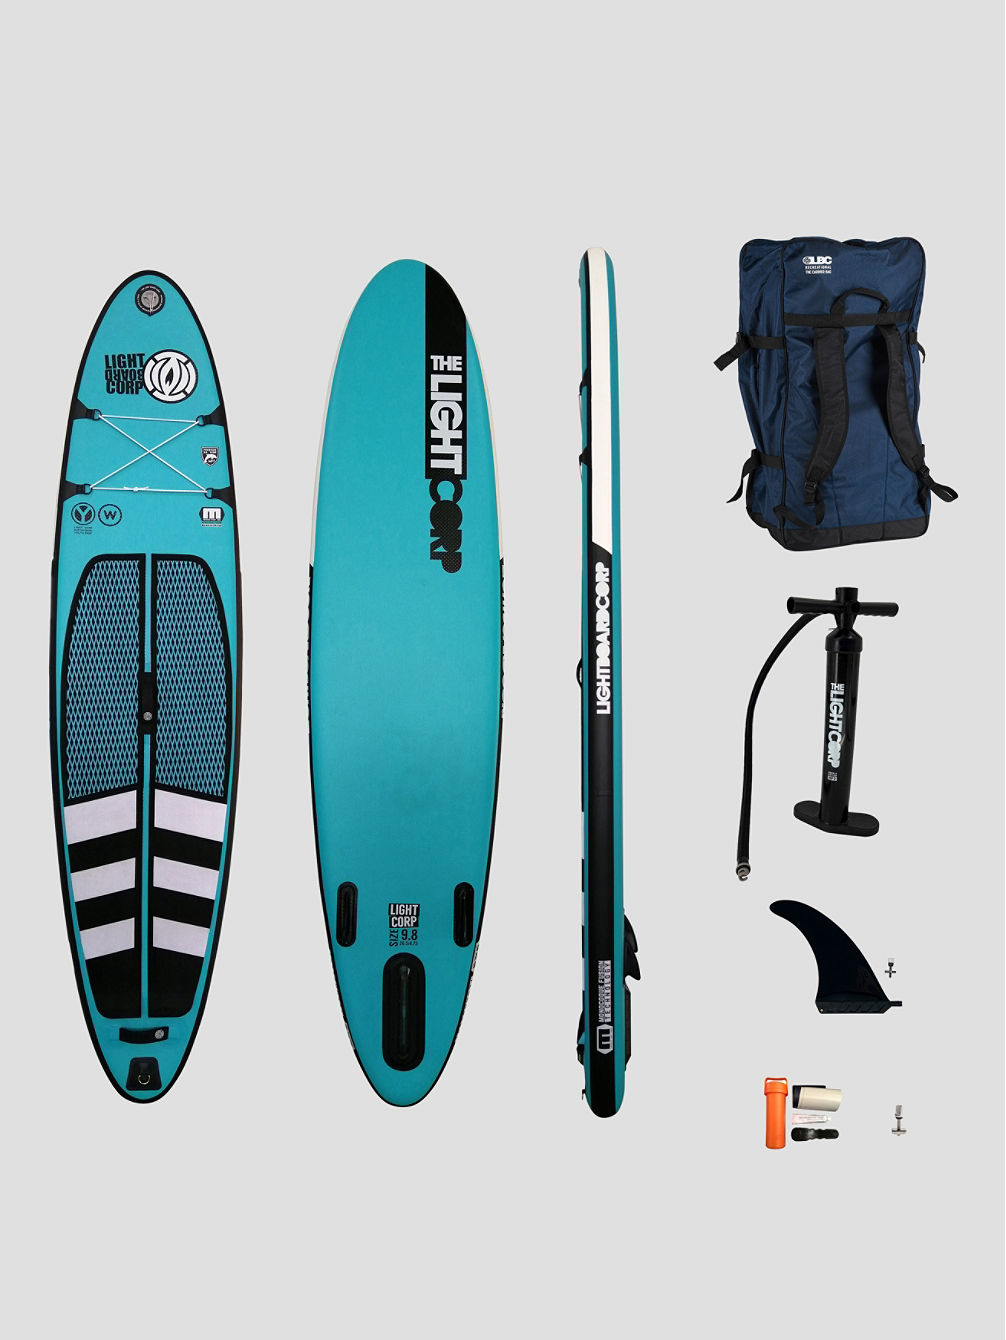 The Blue Series Freeride Youth 9&amp;#039;8 Planche SUP